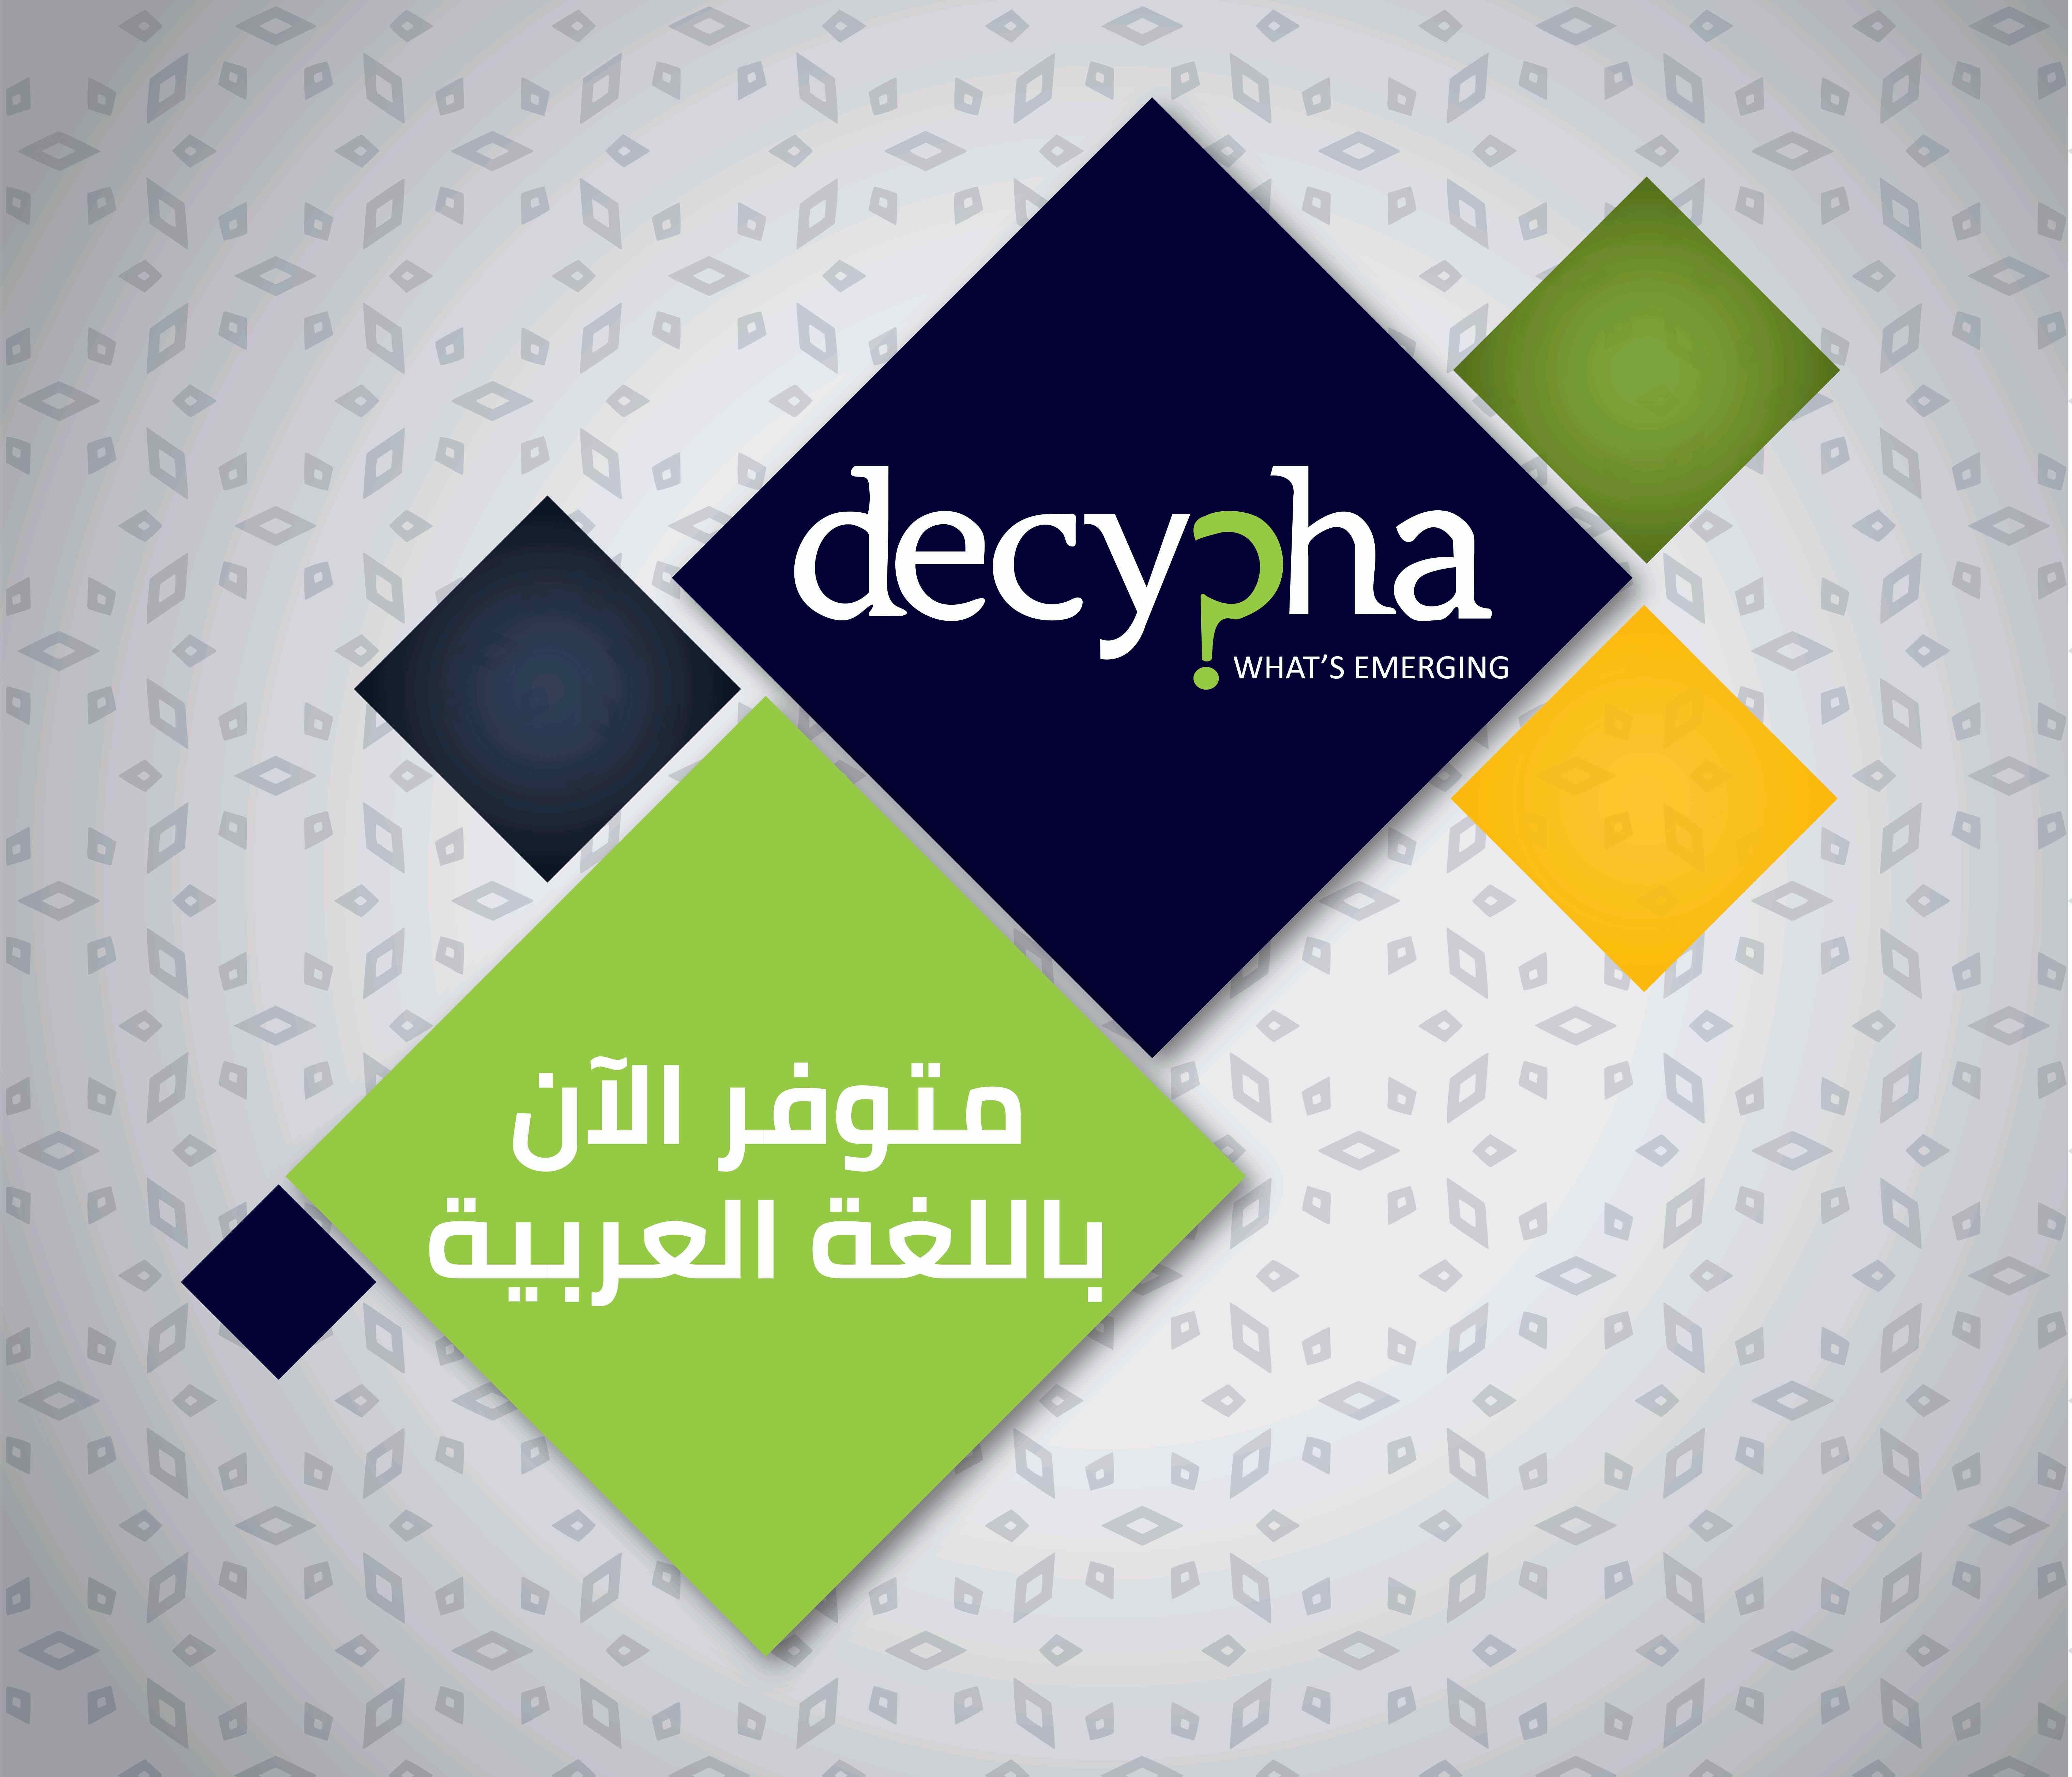 Decypha is now available in Arabic